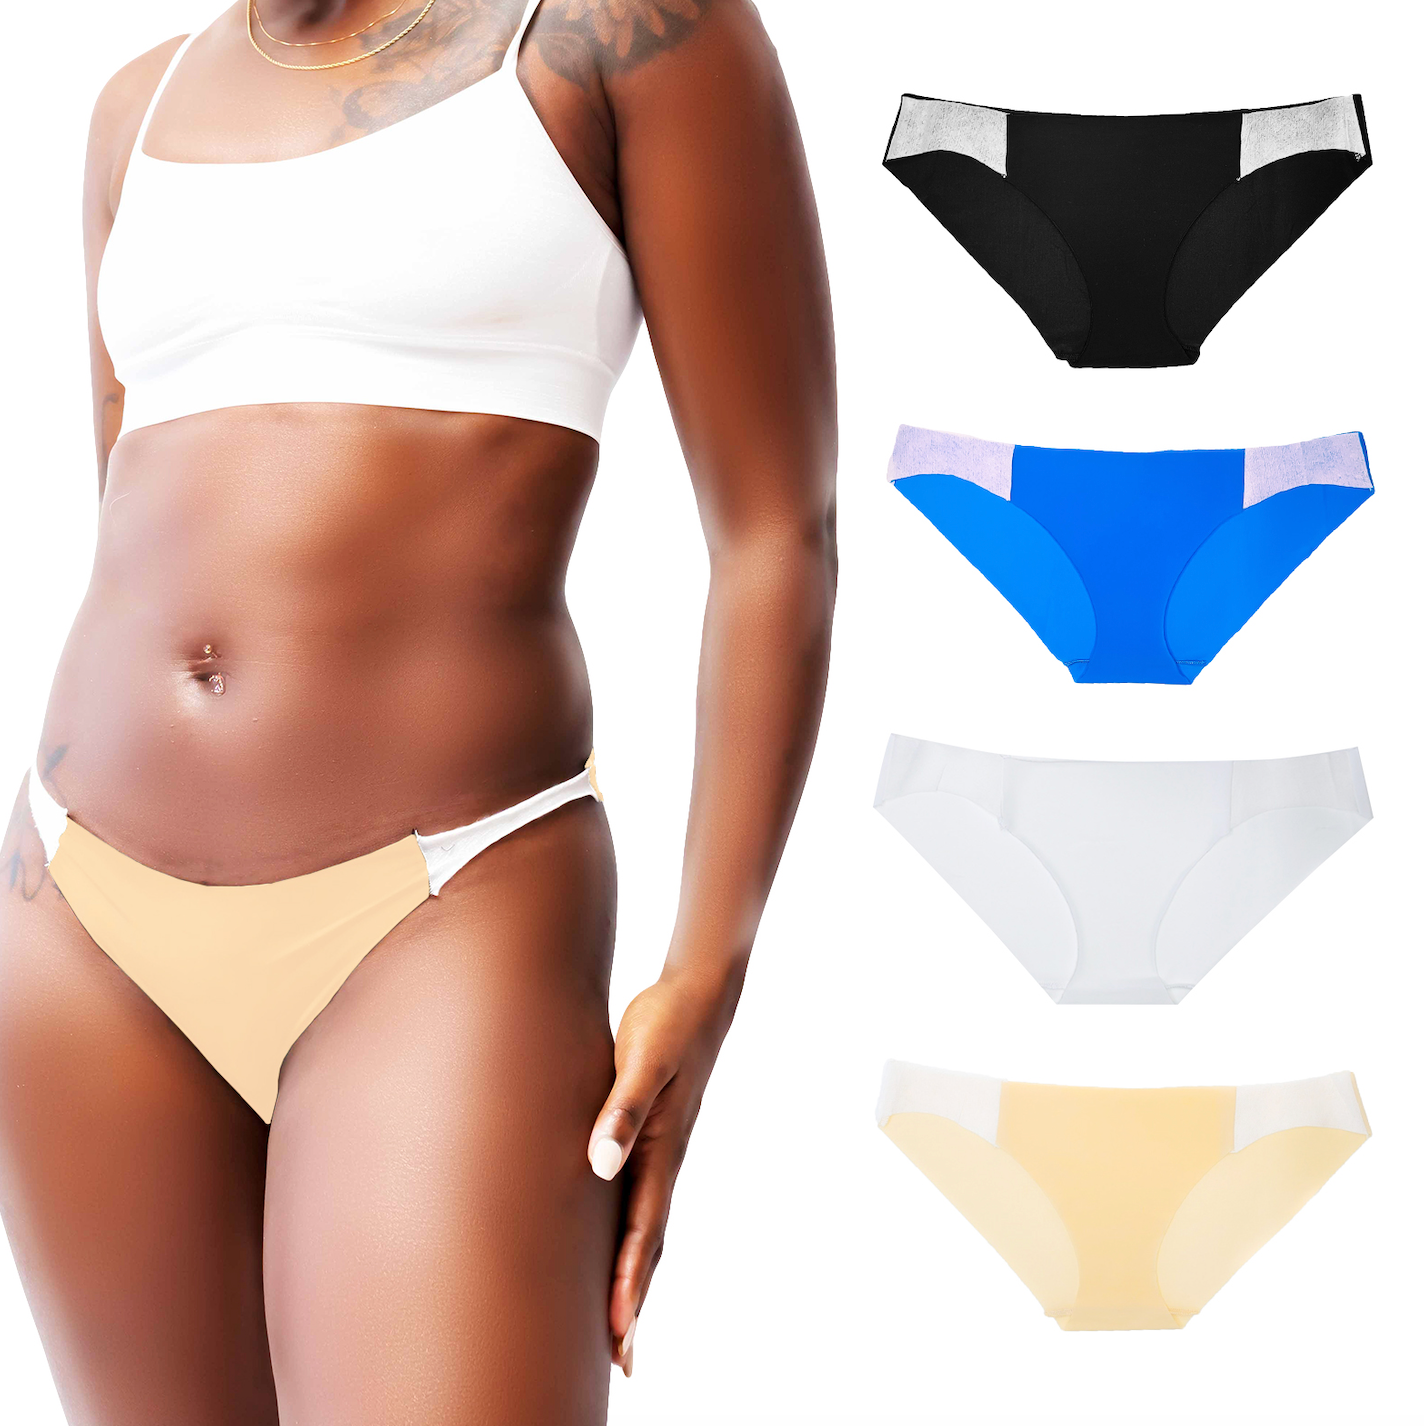 Ohhs, First Black Woman Owned Company to Operate a Disposable Bamboo Underwear Line